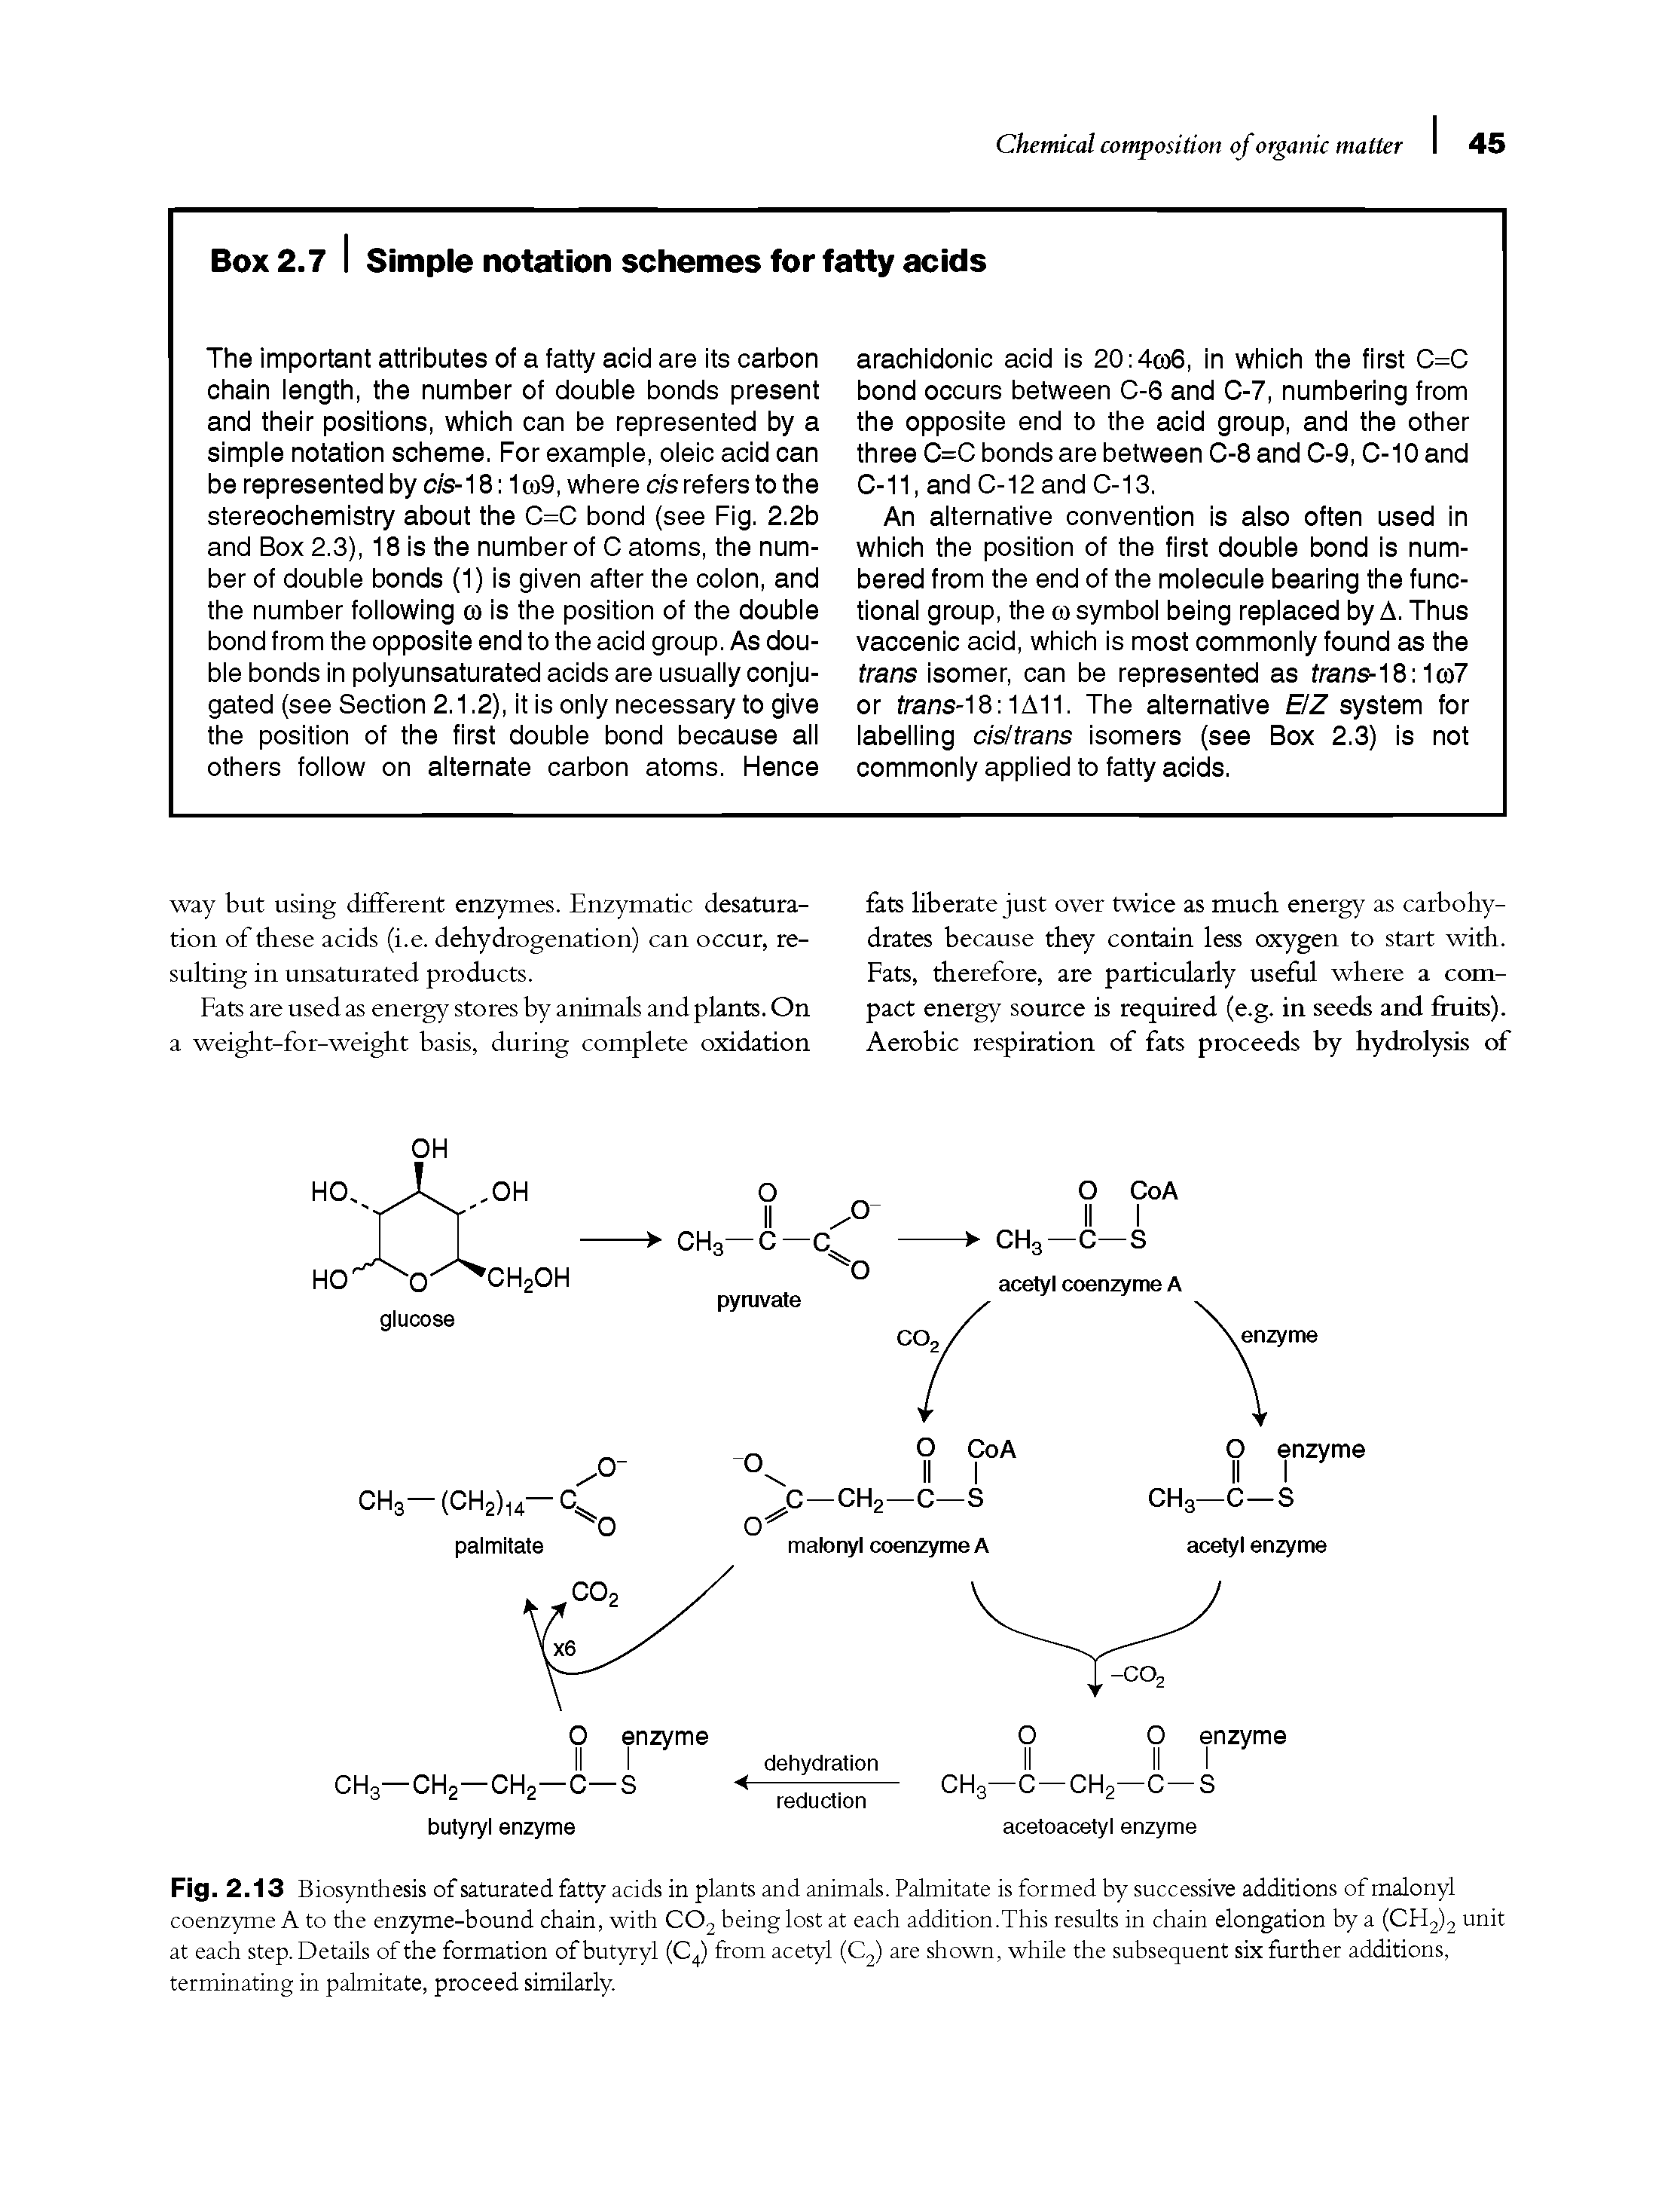 Fig. 2.13 Biosynthesis of saturated fatty acids in plants and animals. Palmitate is formed by successive additions of malonyl coenzyme A to the enzyme-bound chain, with C02 being lost at each addition.This results in chain elongation by a (CH2)2 unit at each step. Details of the formation of butyryl (C4) from acetyl (C2) are shown, while the subsequent six further additions, terminating in palmitate, proceed similarly.